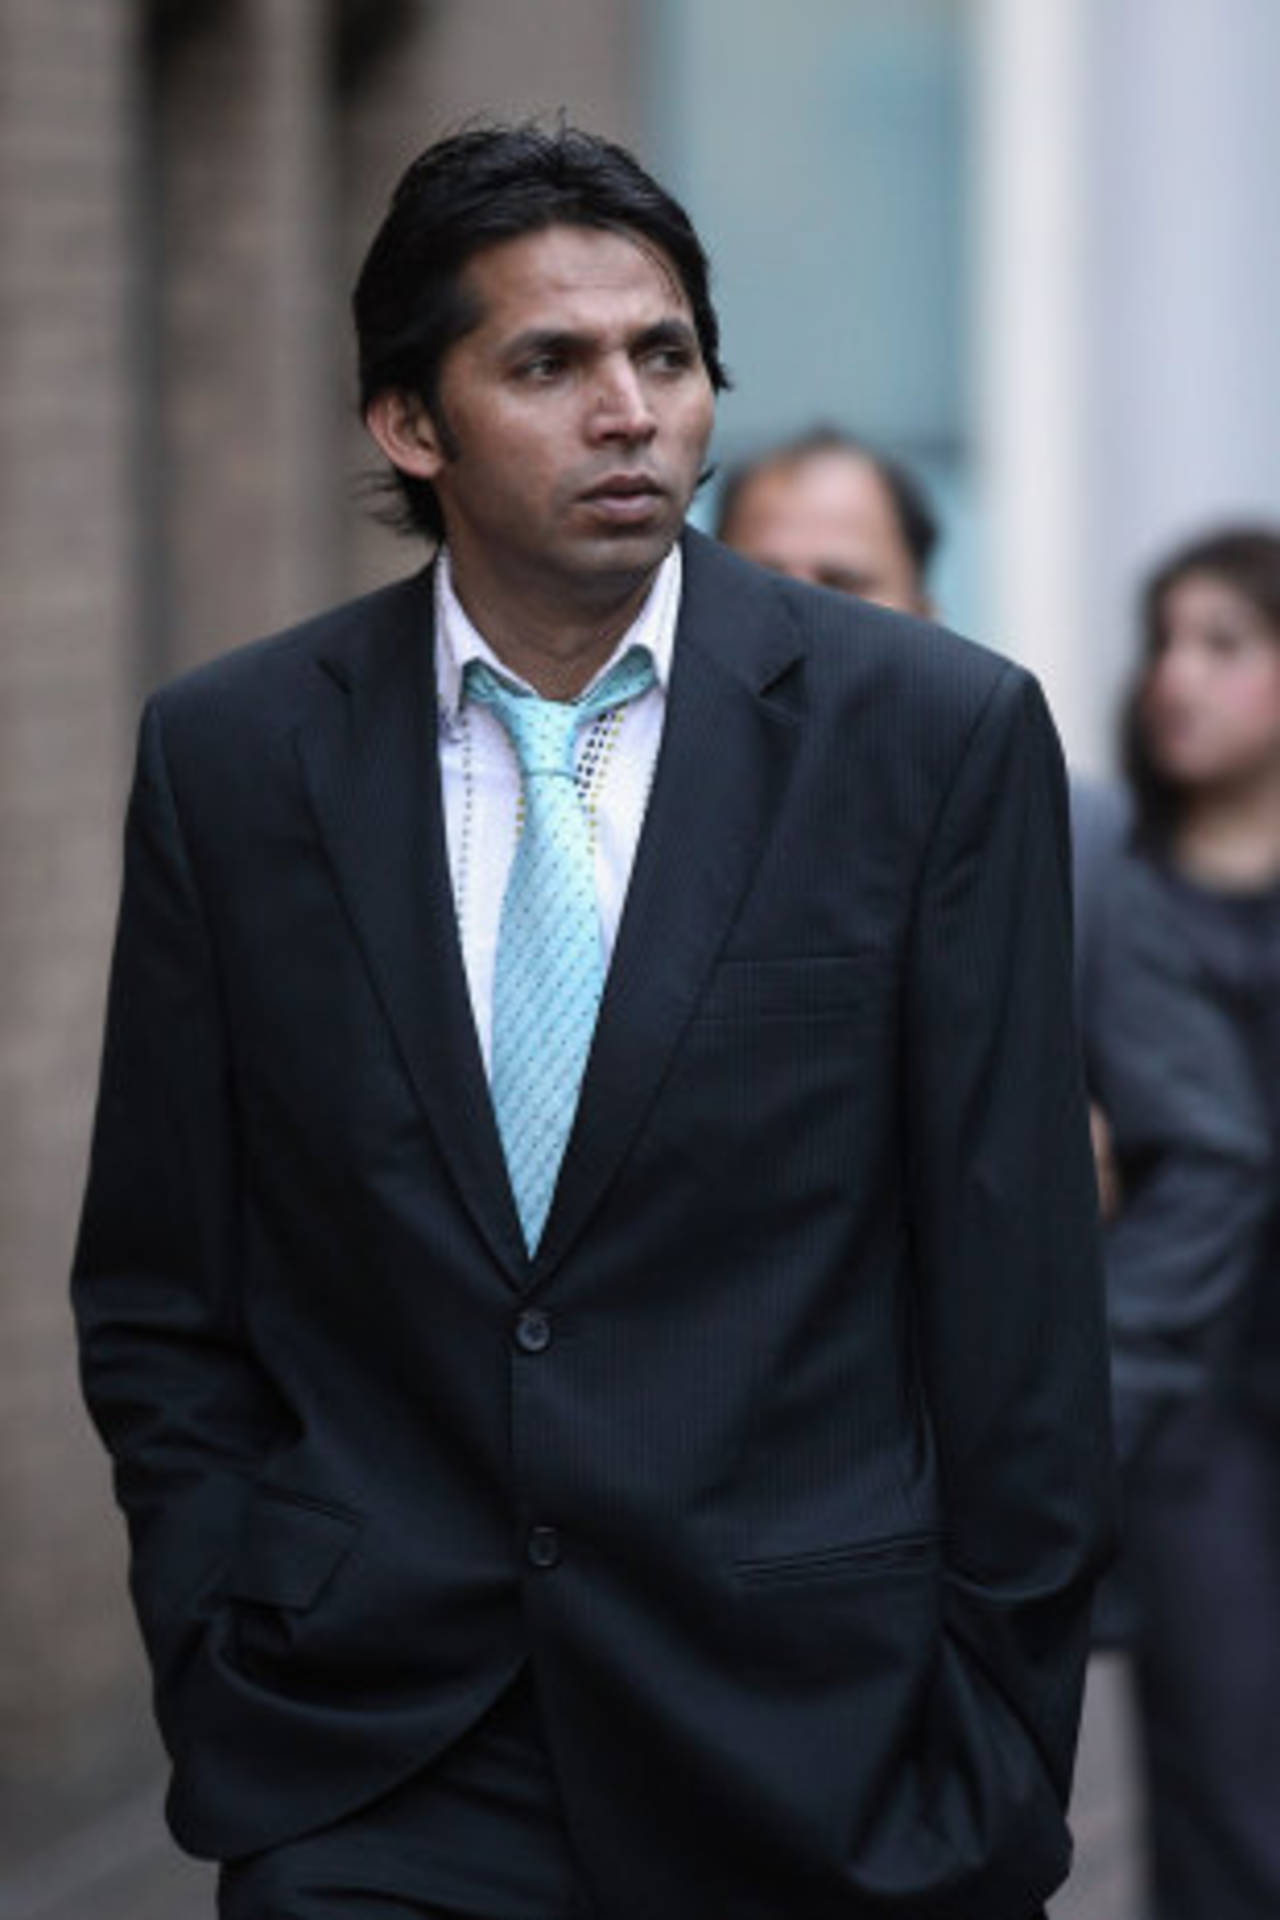 Mohammad Asif arrives at Southwark Crown Court, London, October 18, 2011